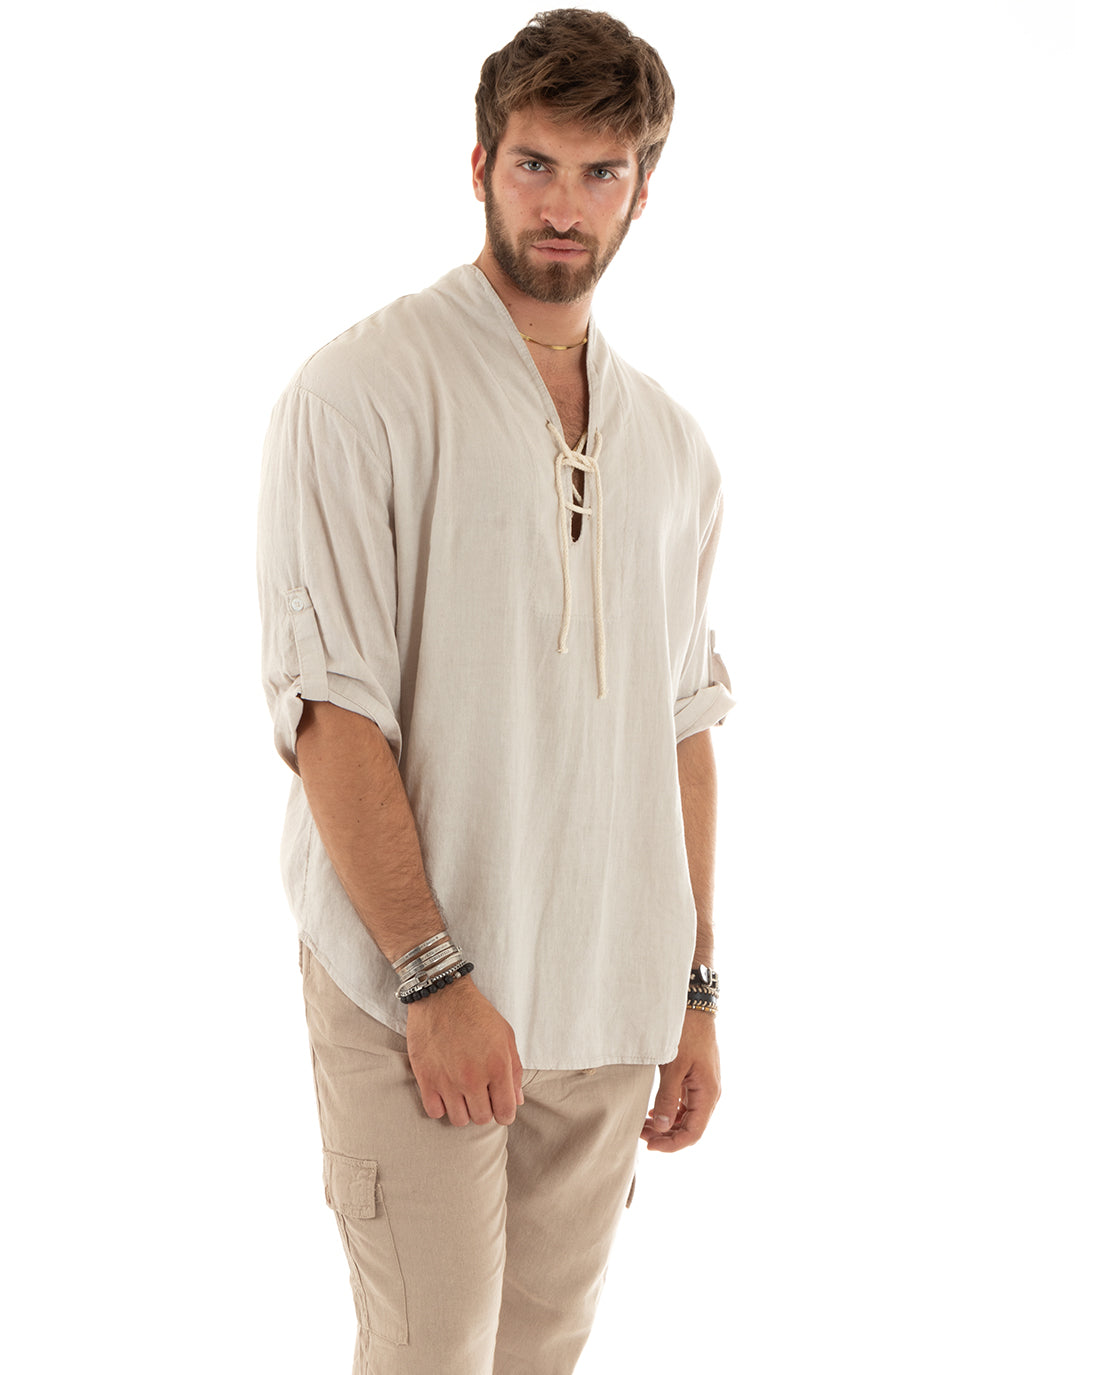 Men's Linen Shirt Solid Color Tunic 3/4 Sleeve V-Neck with Laces Green Casual GIOSAL-C2740A